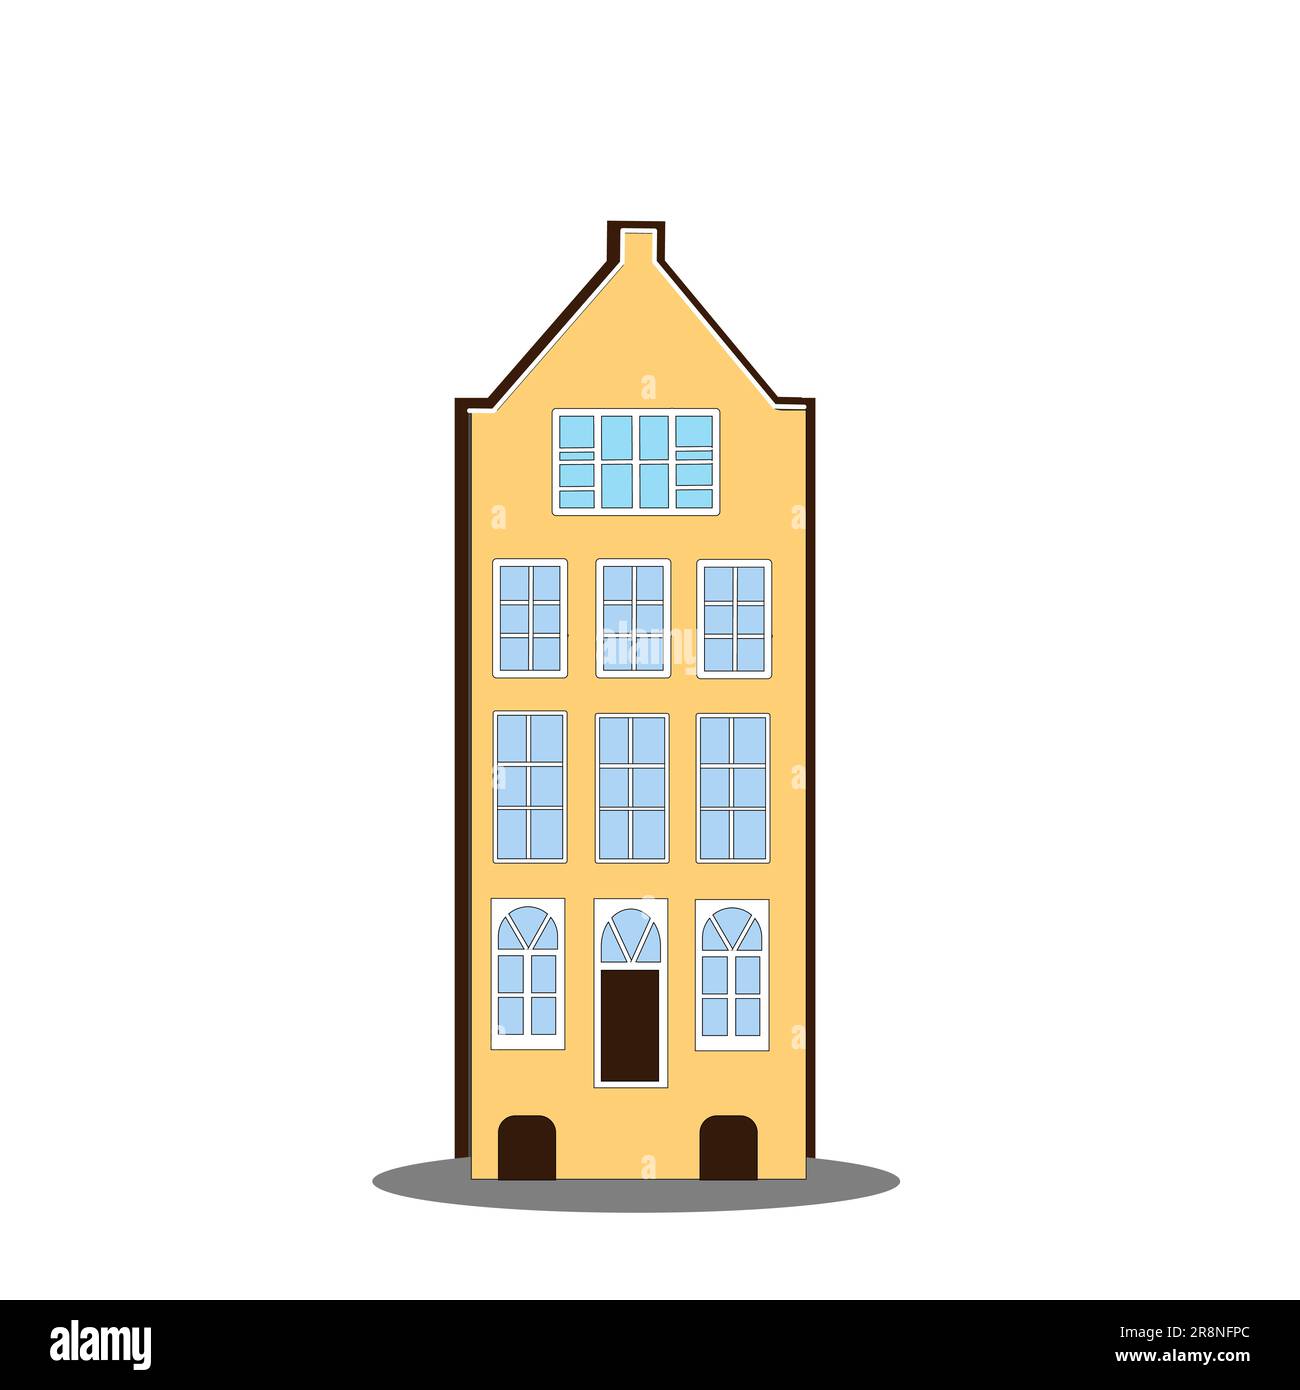 Amsterdam old house in the Dutch style. Yellow colorful historic facade. Traditional architecture of Netherlands. Vector illustration flat cartoon sty Stock Vector